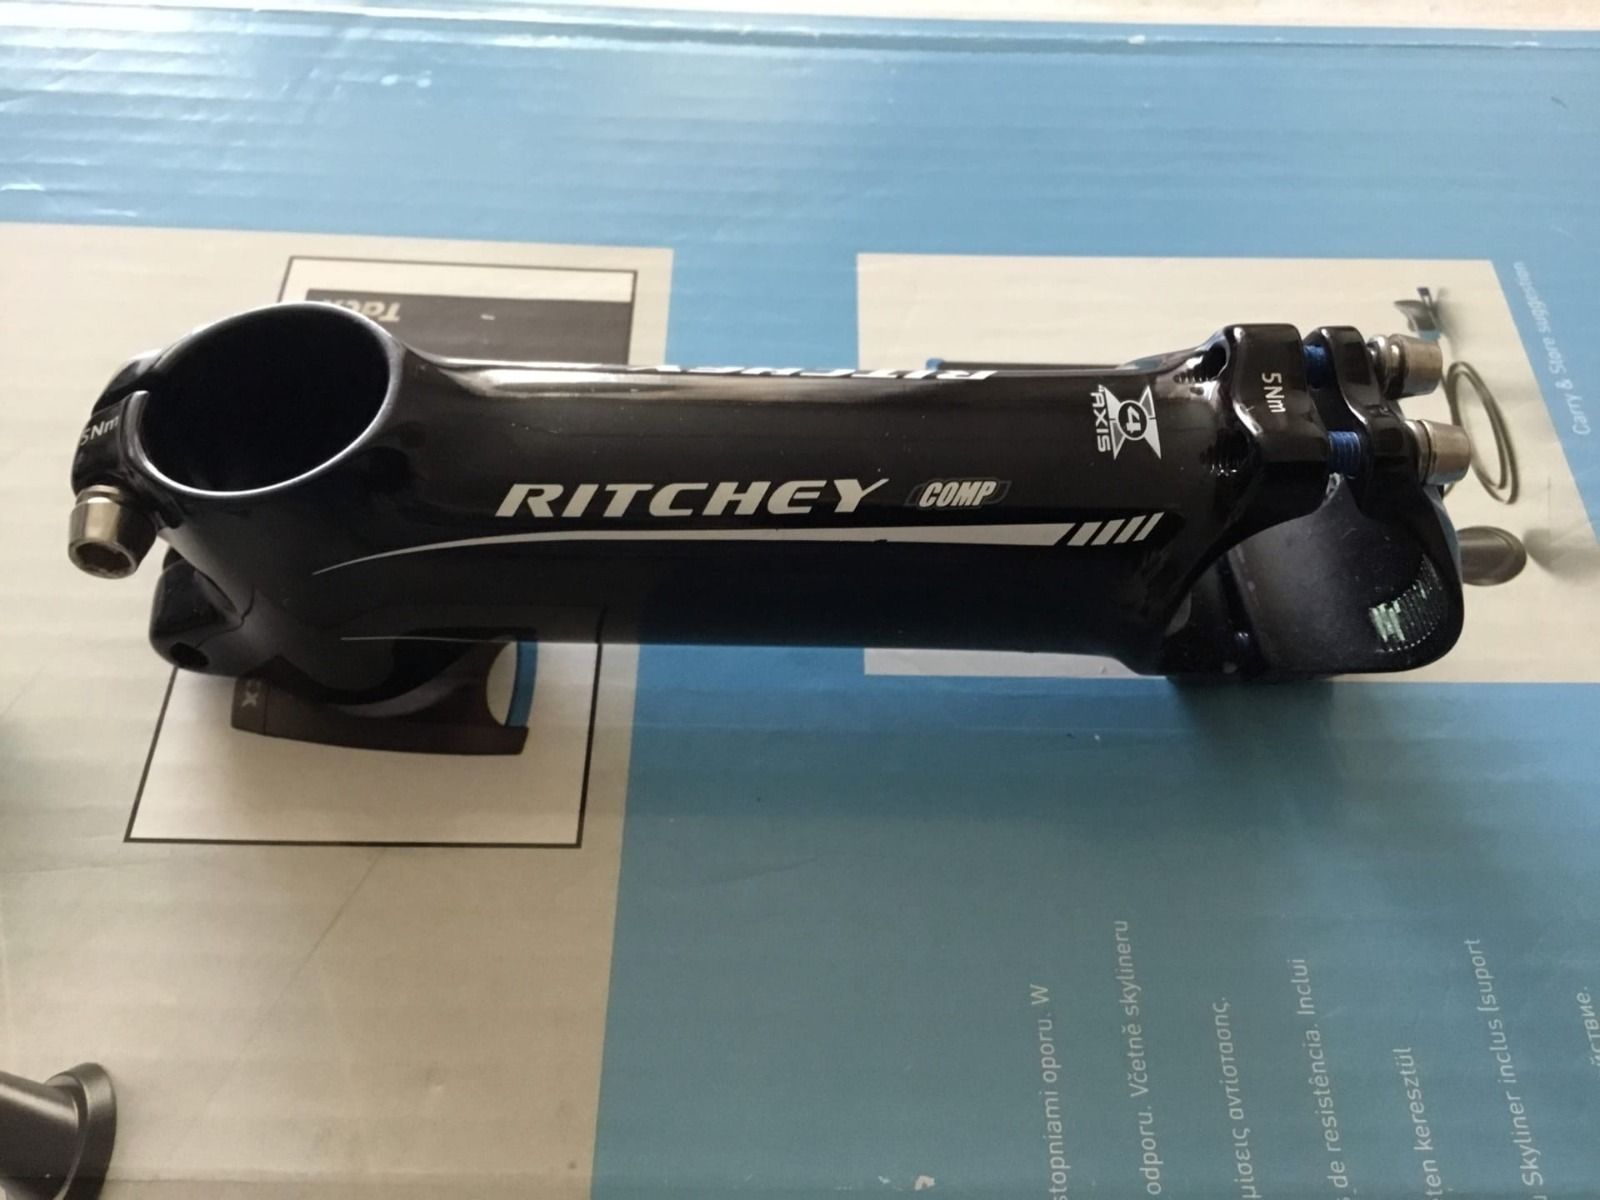 Ritchey comp 4 axis 6° 120mm